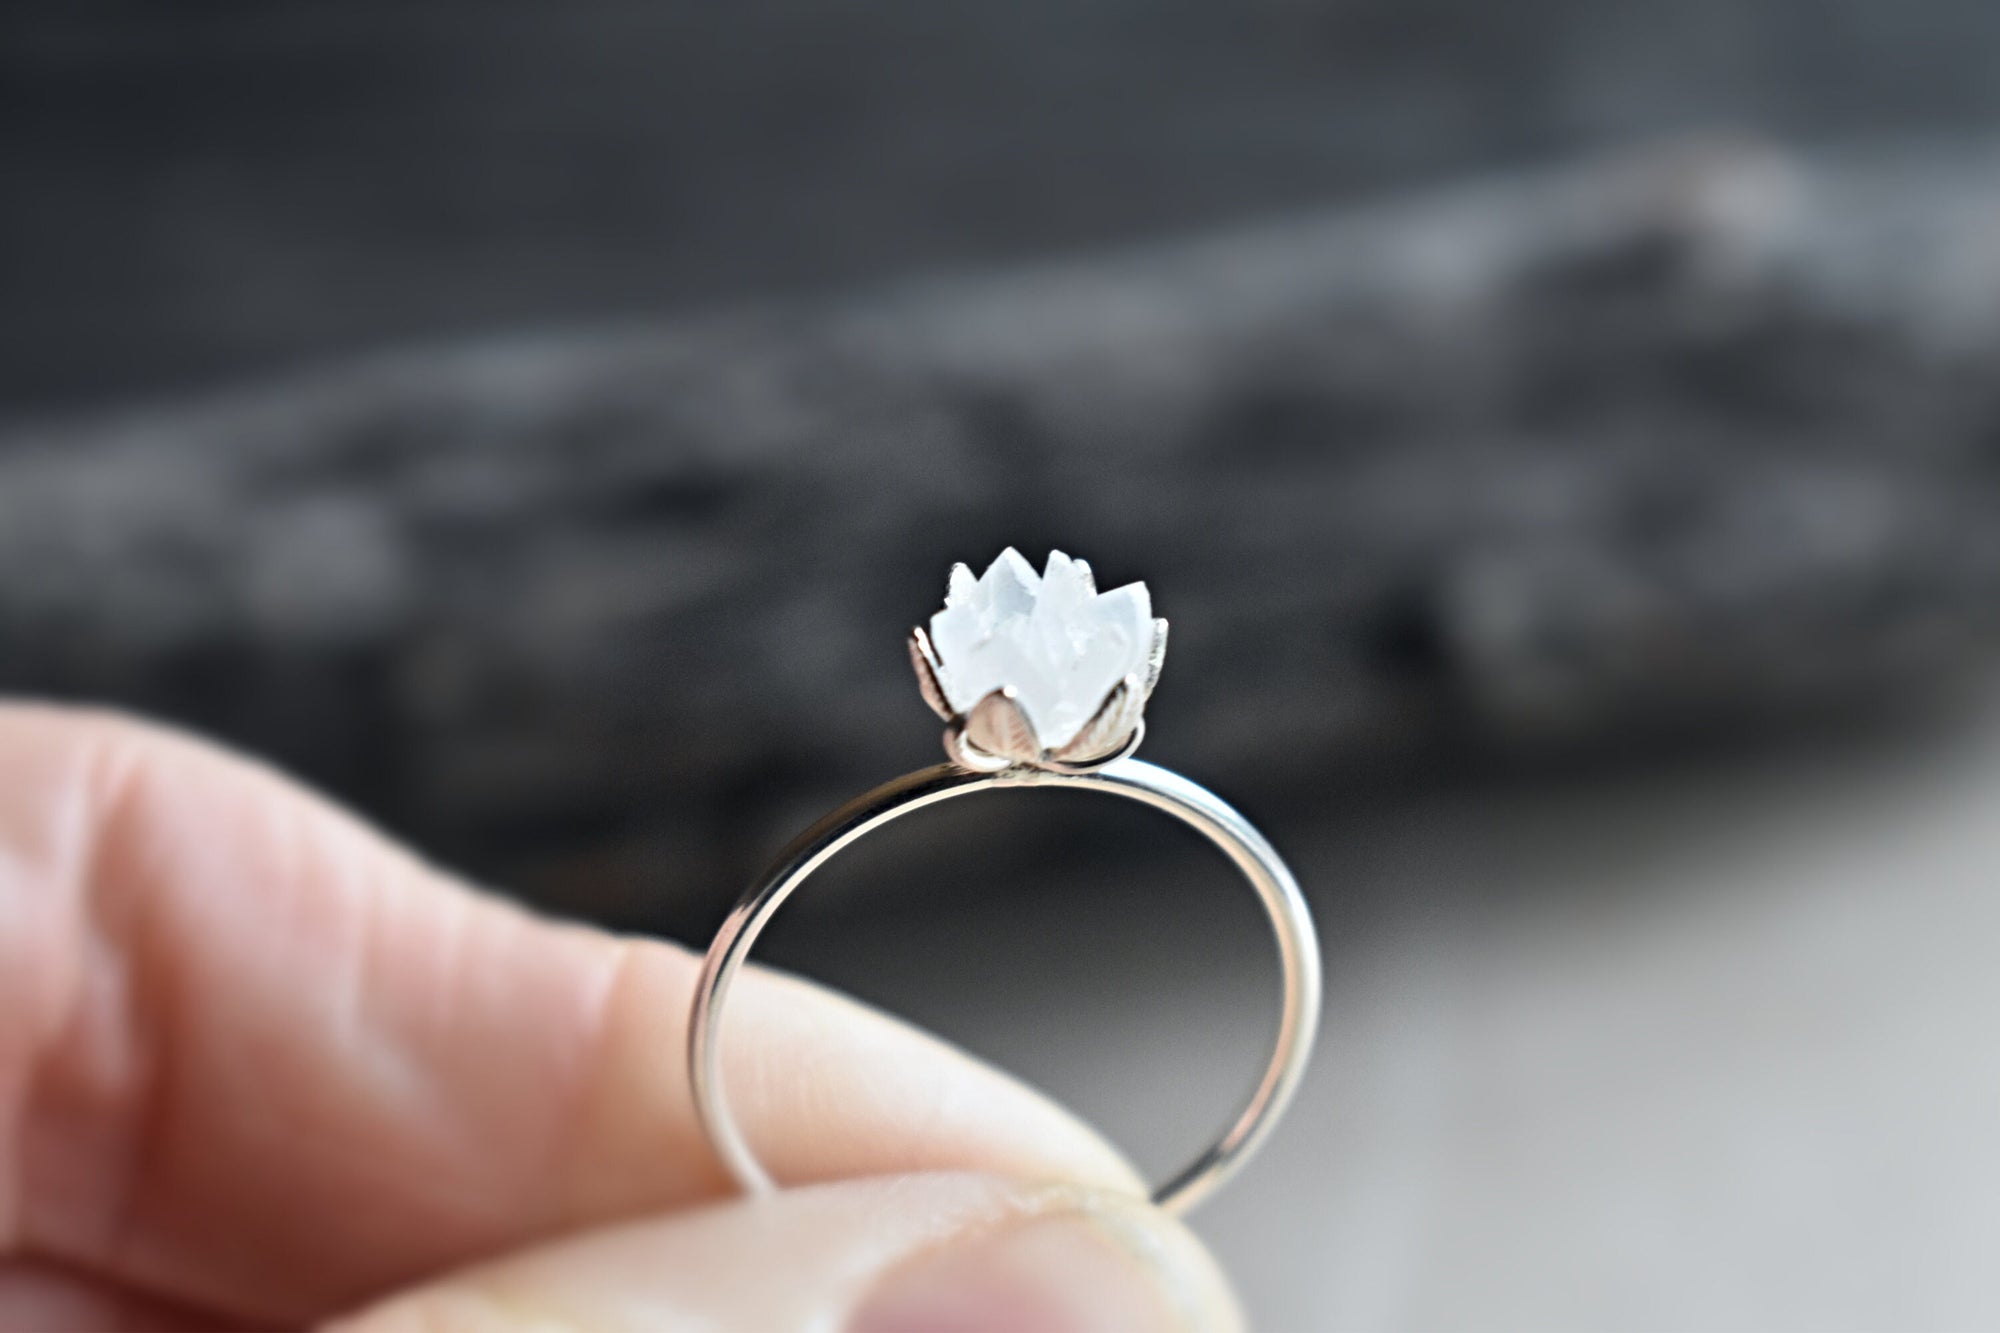 White Moonstone Floral Ring, Lotus Flower Ring in Fine Sterling Silver, Rough Gem Ring, Raw Rainbow Moonstone Goddess Jewelry